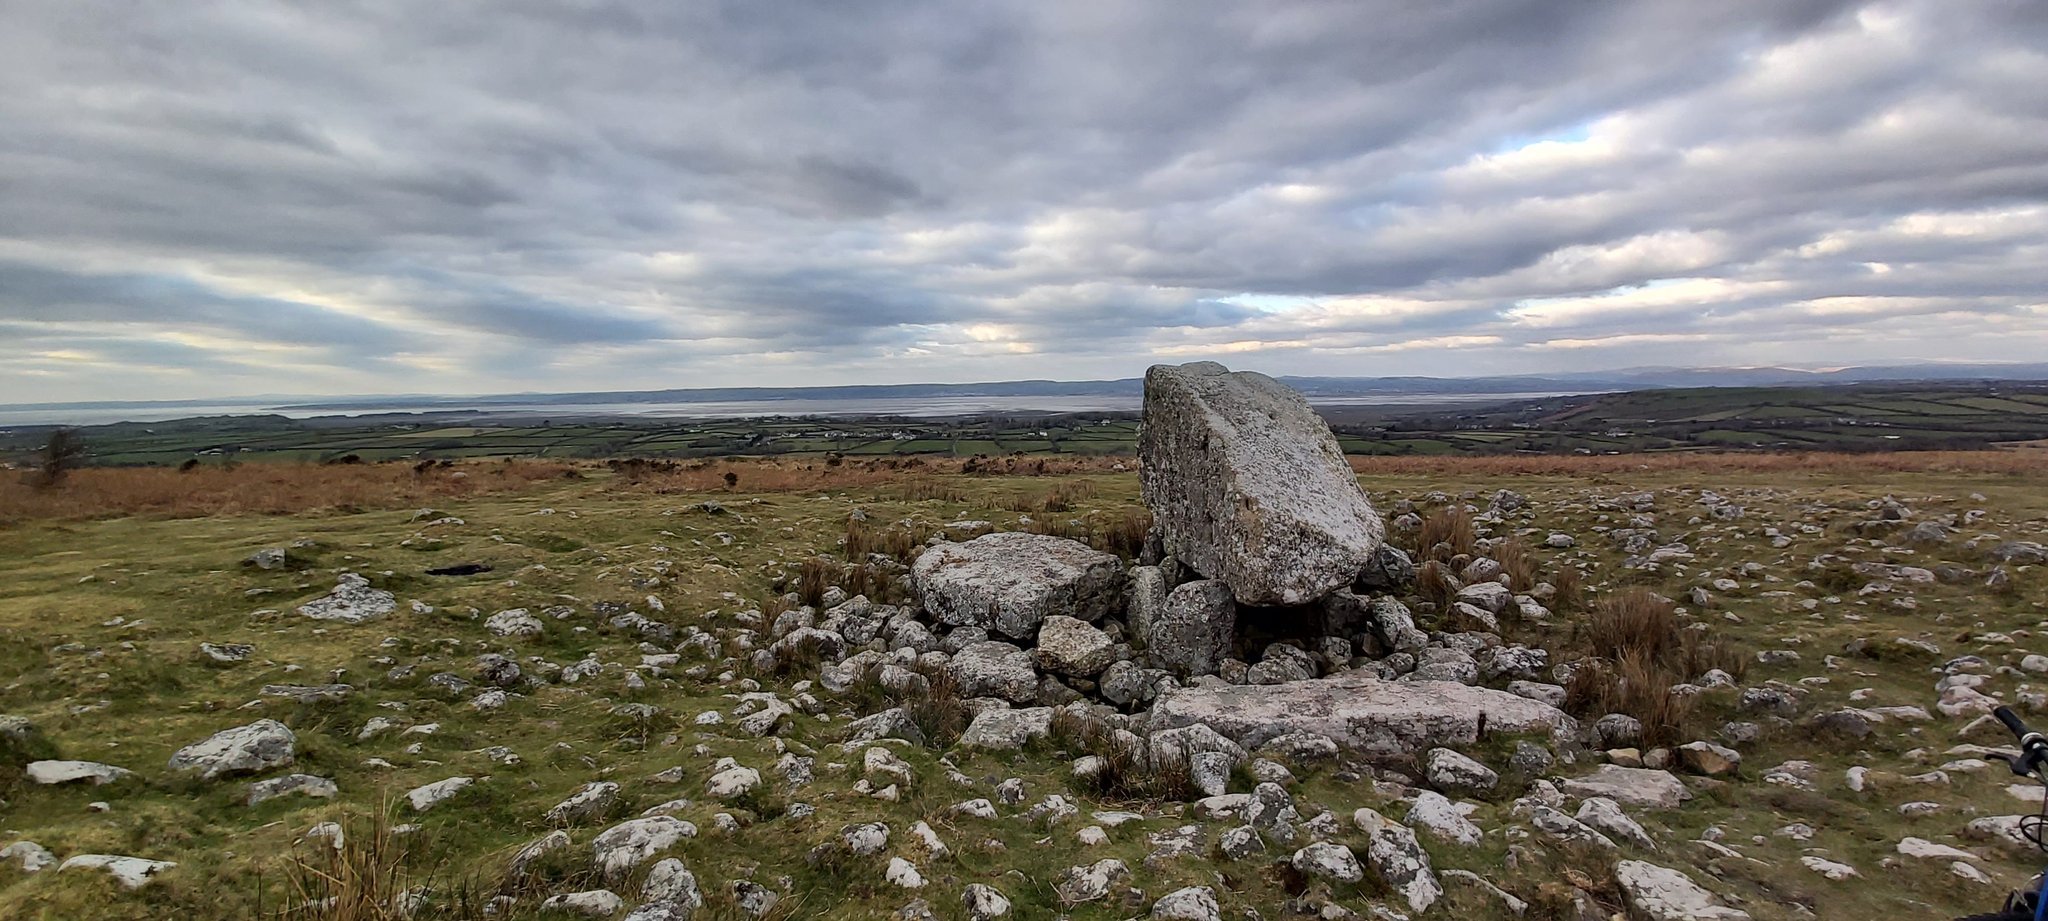 fjorrd:Maen Ceti, “Arthur’s Stone”, in Reynoldston, Wales, is a neolithic burial ground. It was built around 4,500 years ago or earlier. The chamber below the stone, for the tomb, was dug under the massive boulder and was held aloft